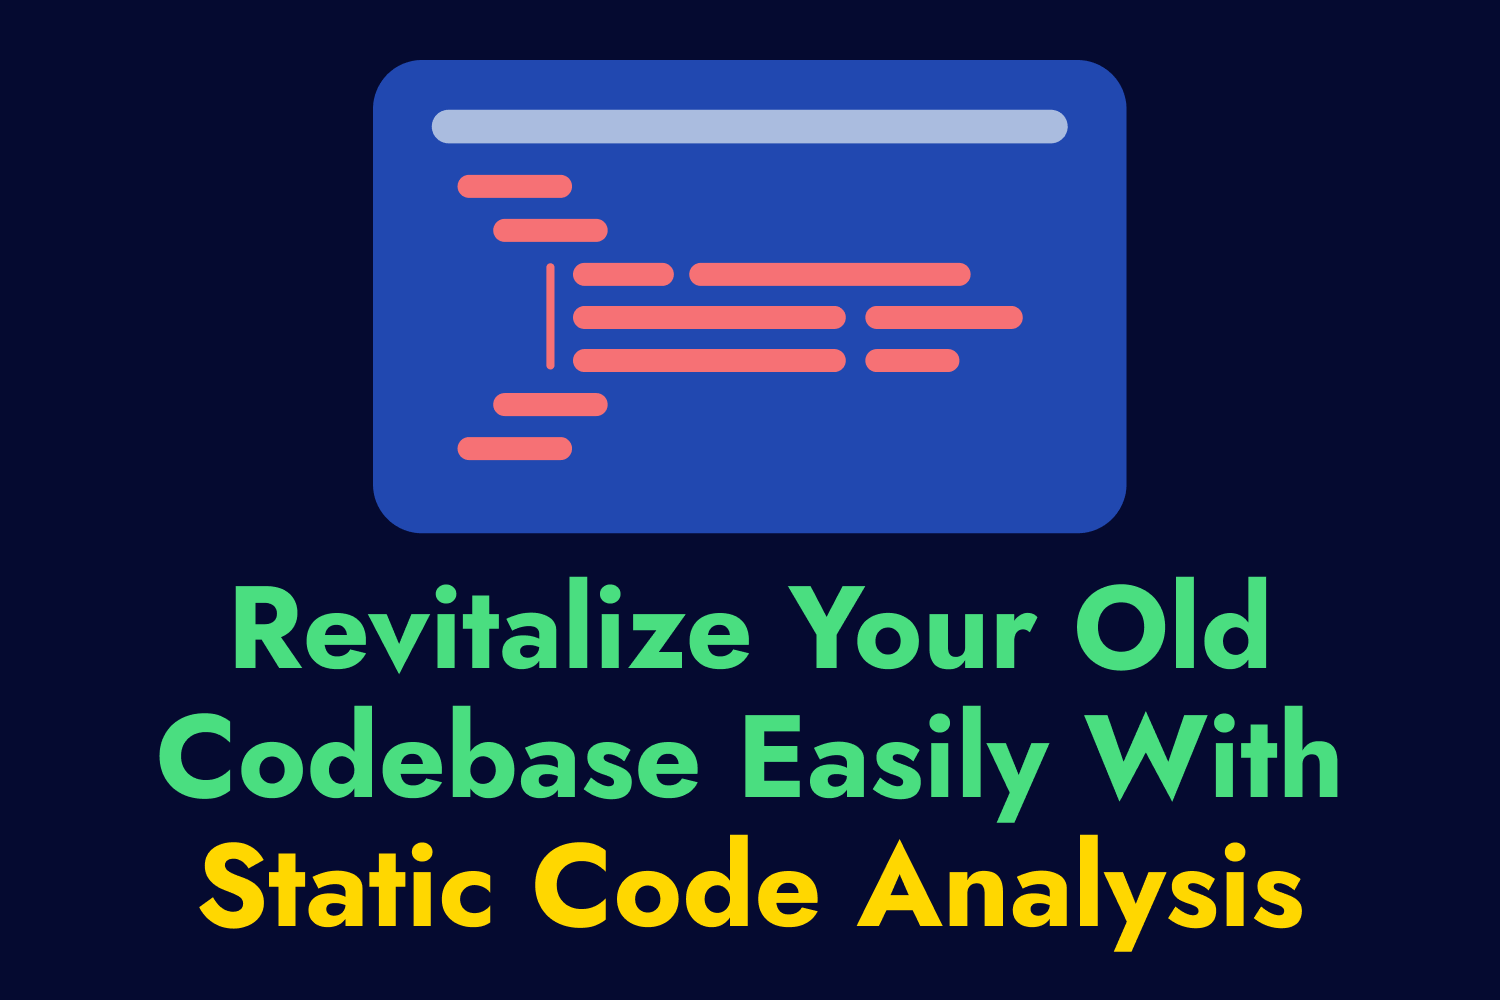 Revitalize Your Old Codebase Easily With Static Code Analysis